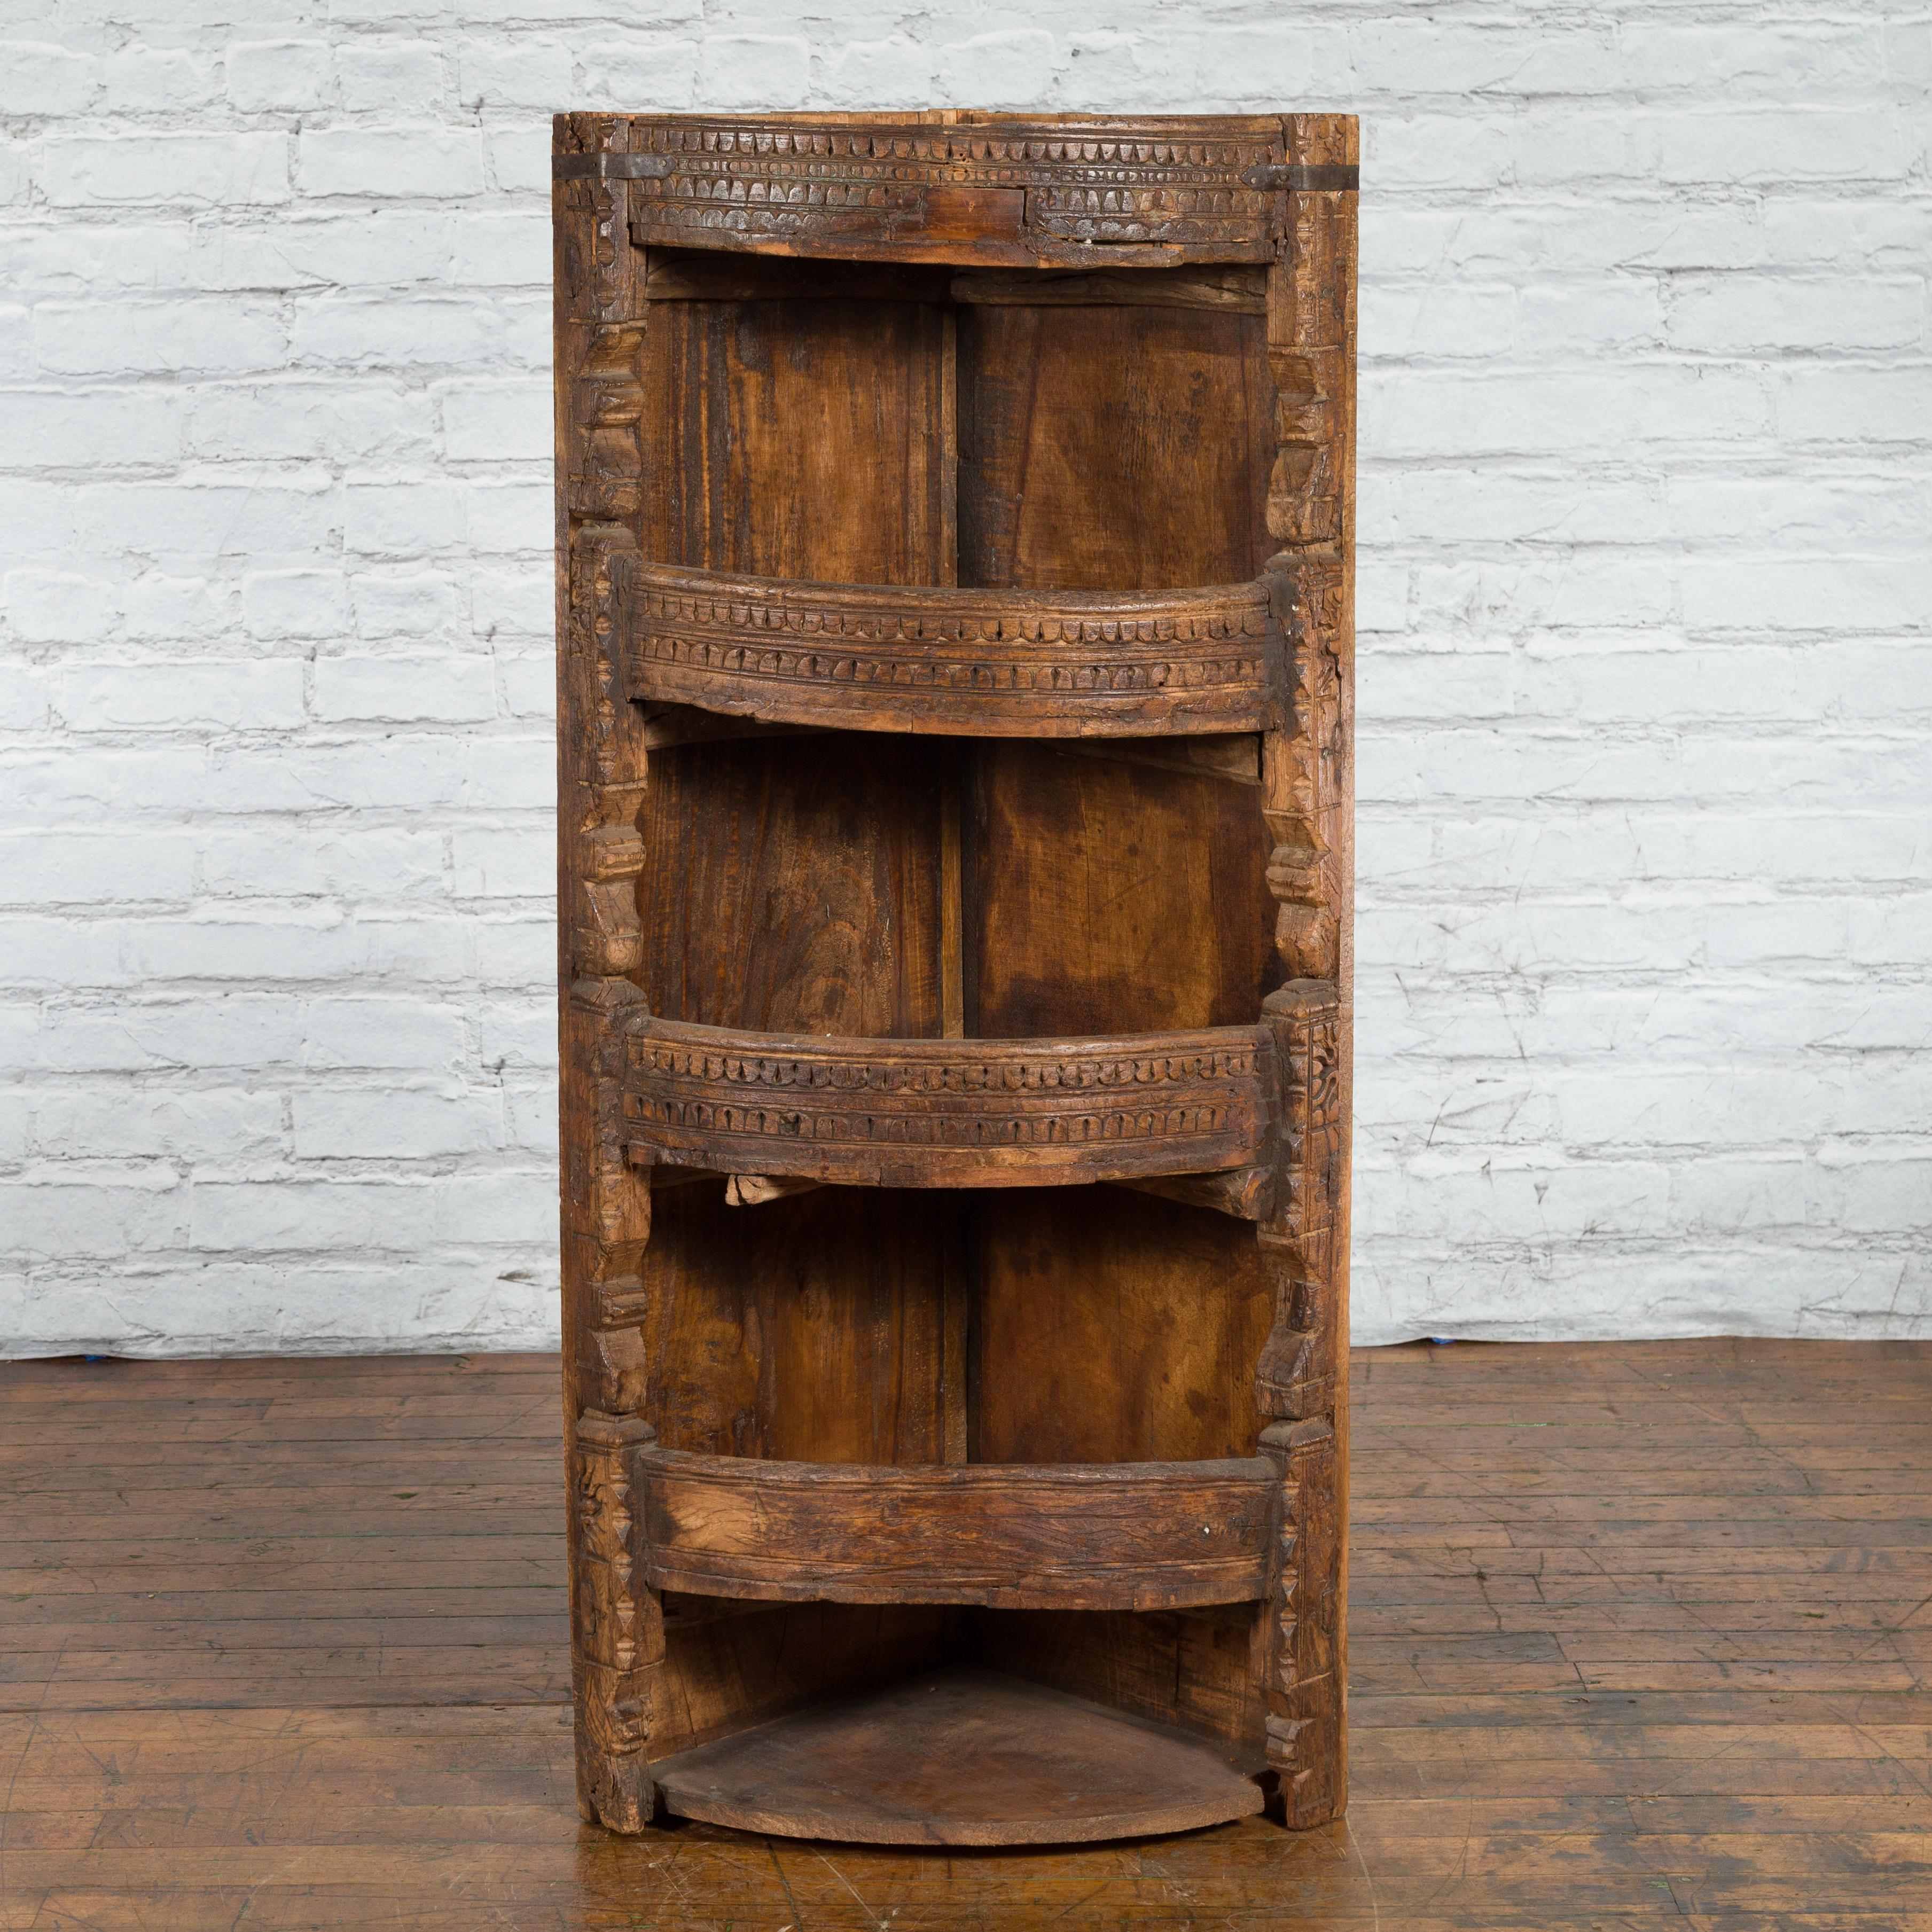 Rustic Indian 19th Century Corner Cabinet with Carved Motifs and Shelves For Sale 2